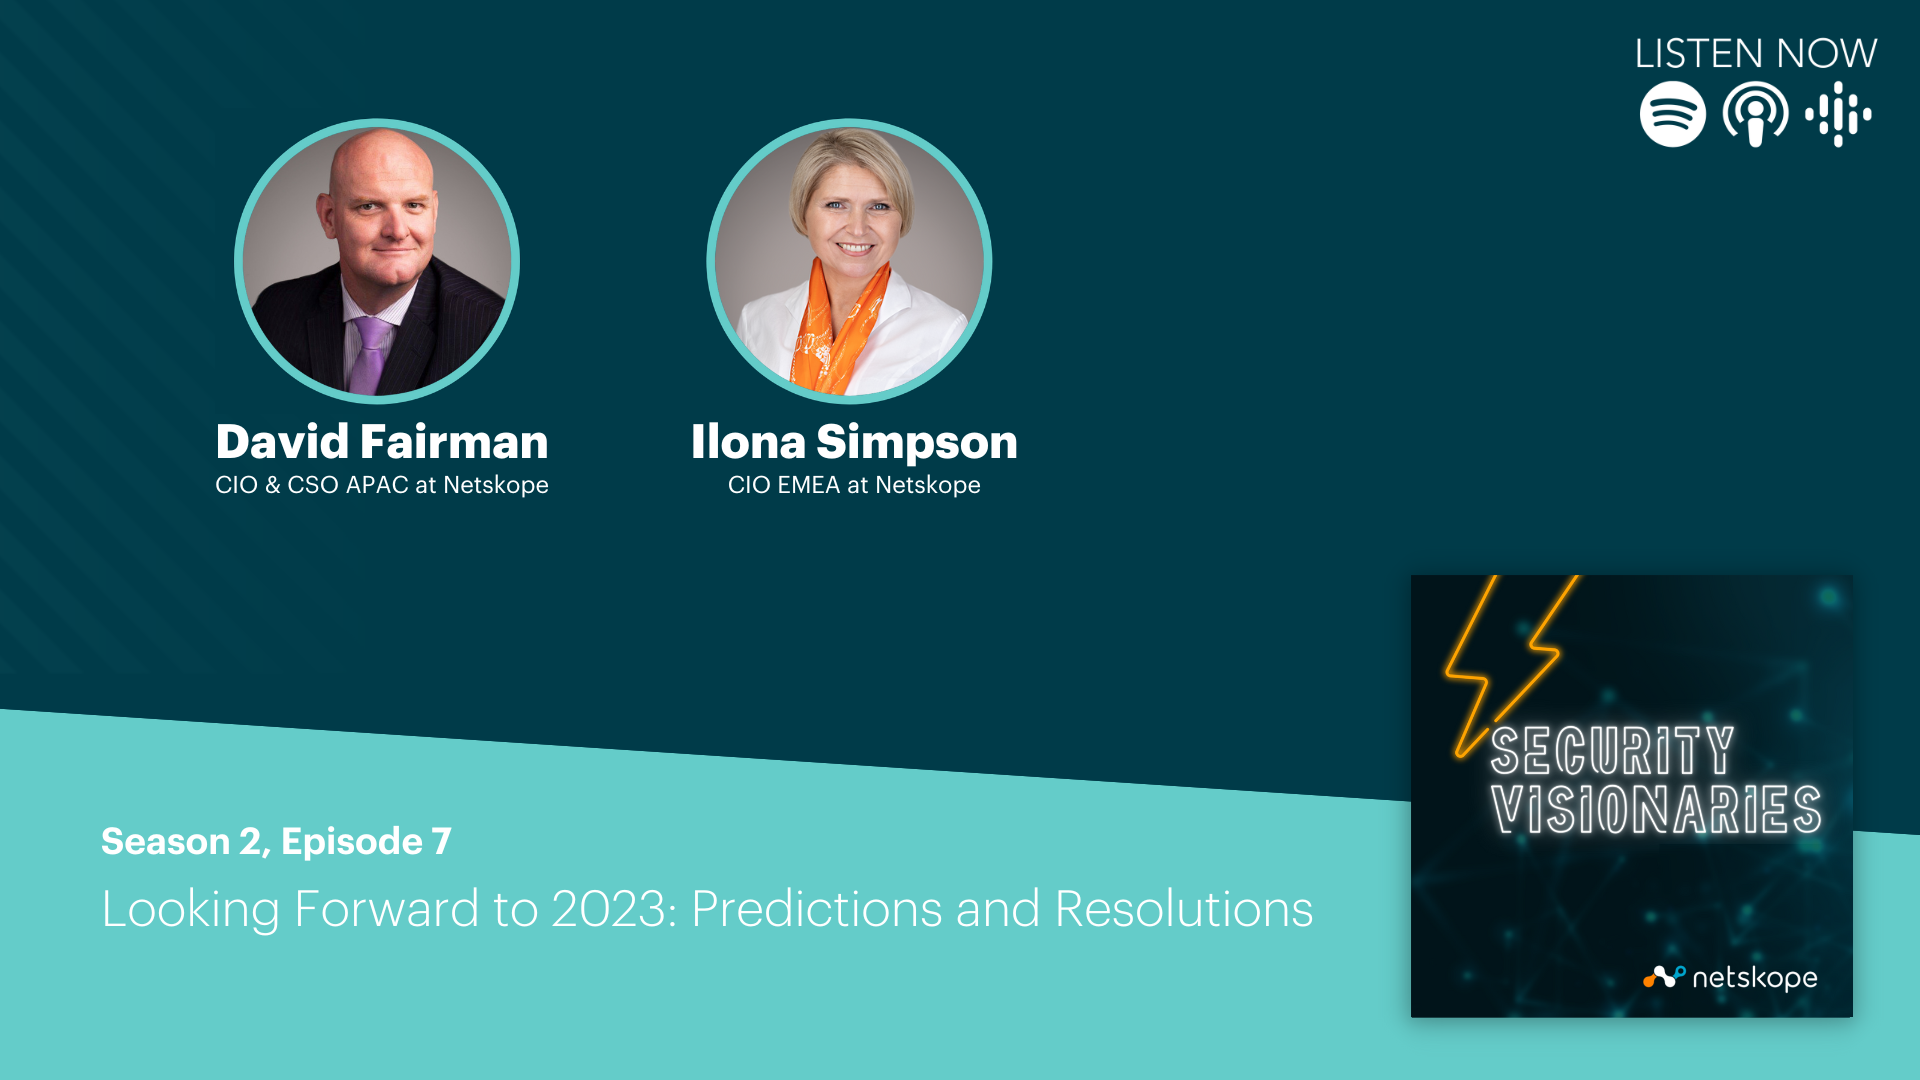 Looking Forward to 2023: Predictions and Resolutions